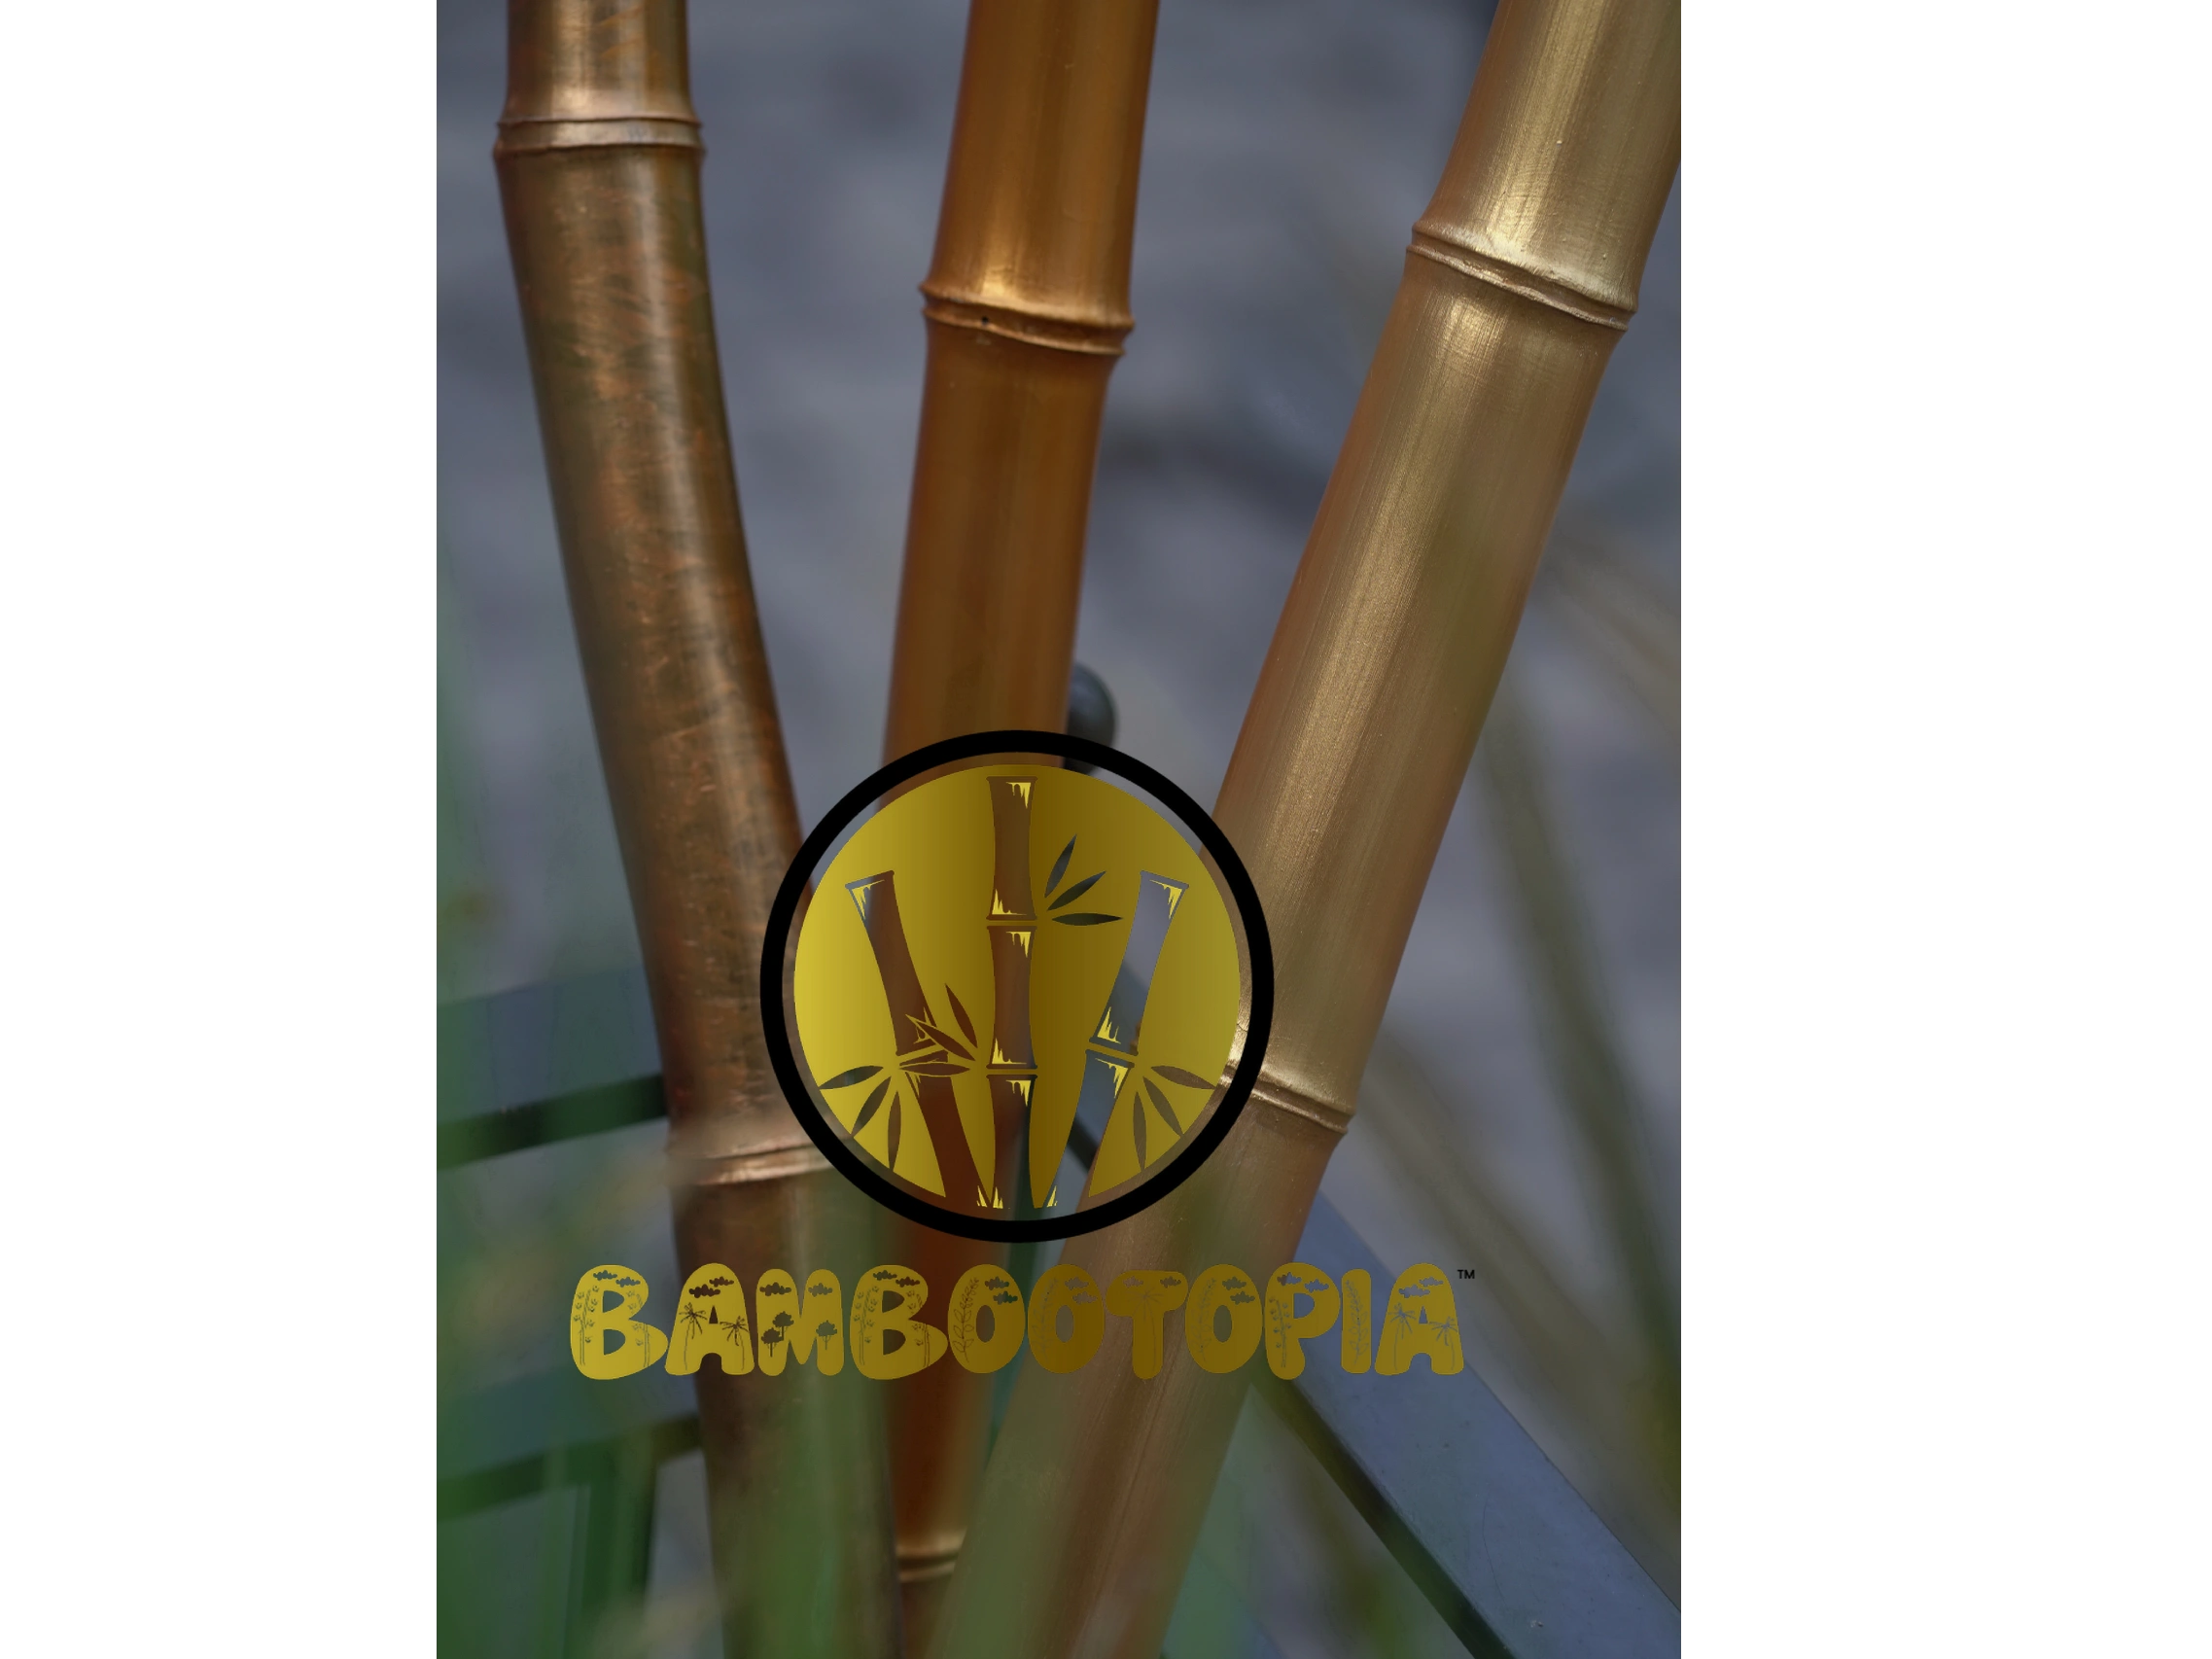 Enter into better living, we are a new health and wellness business offering bamboo products. 
